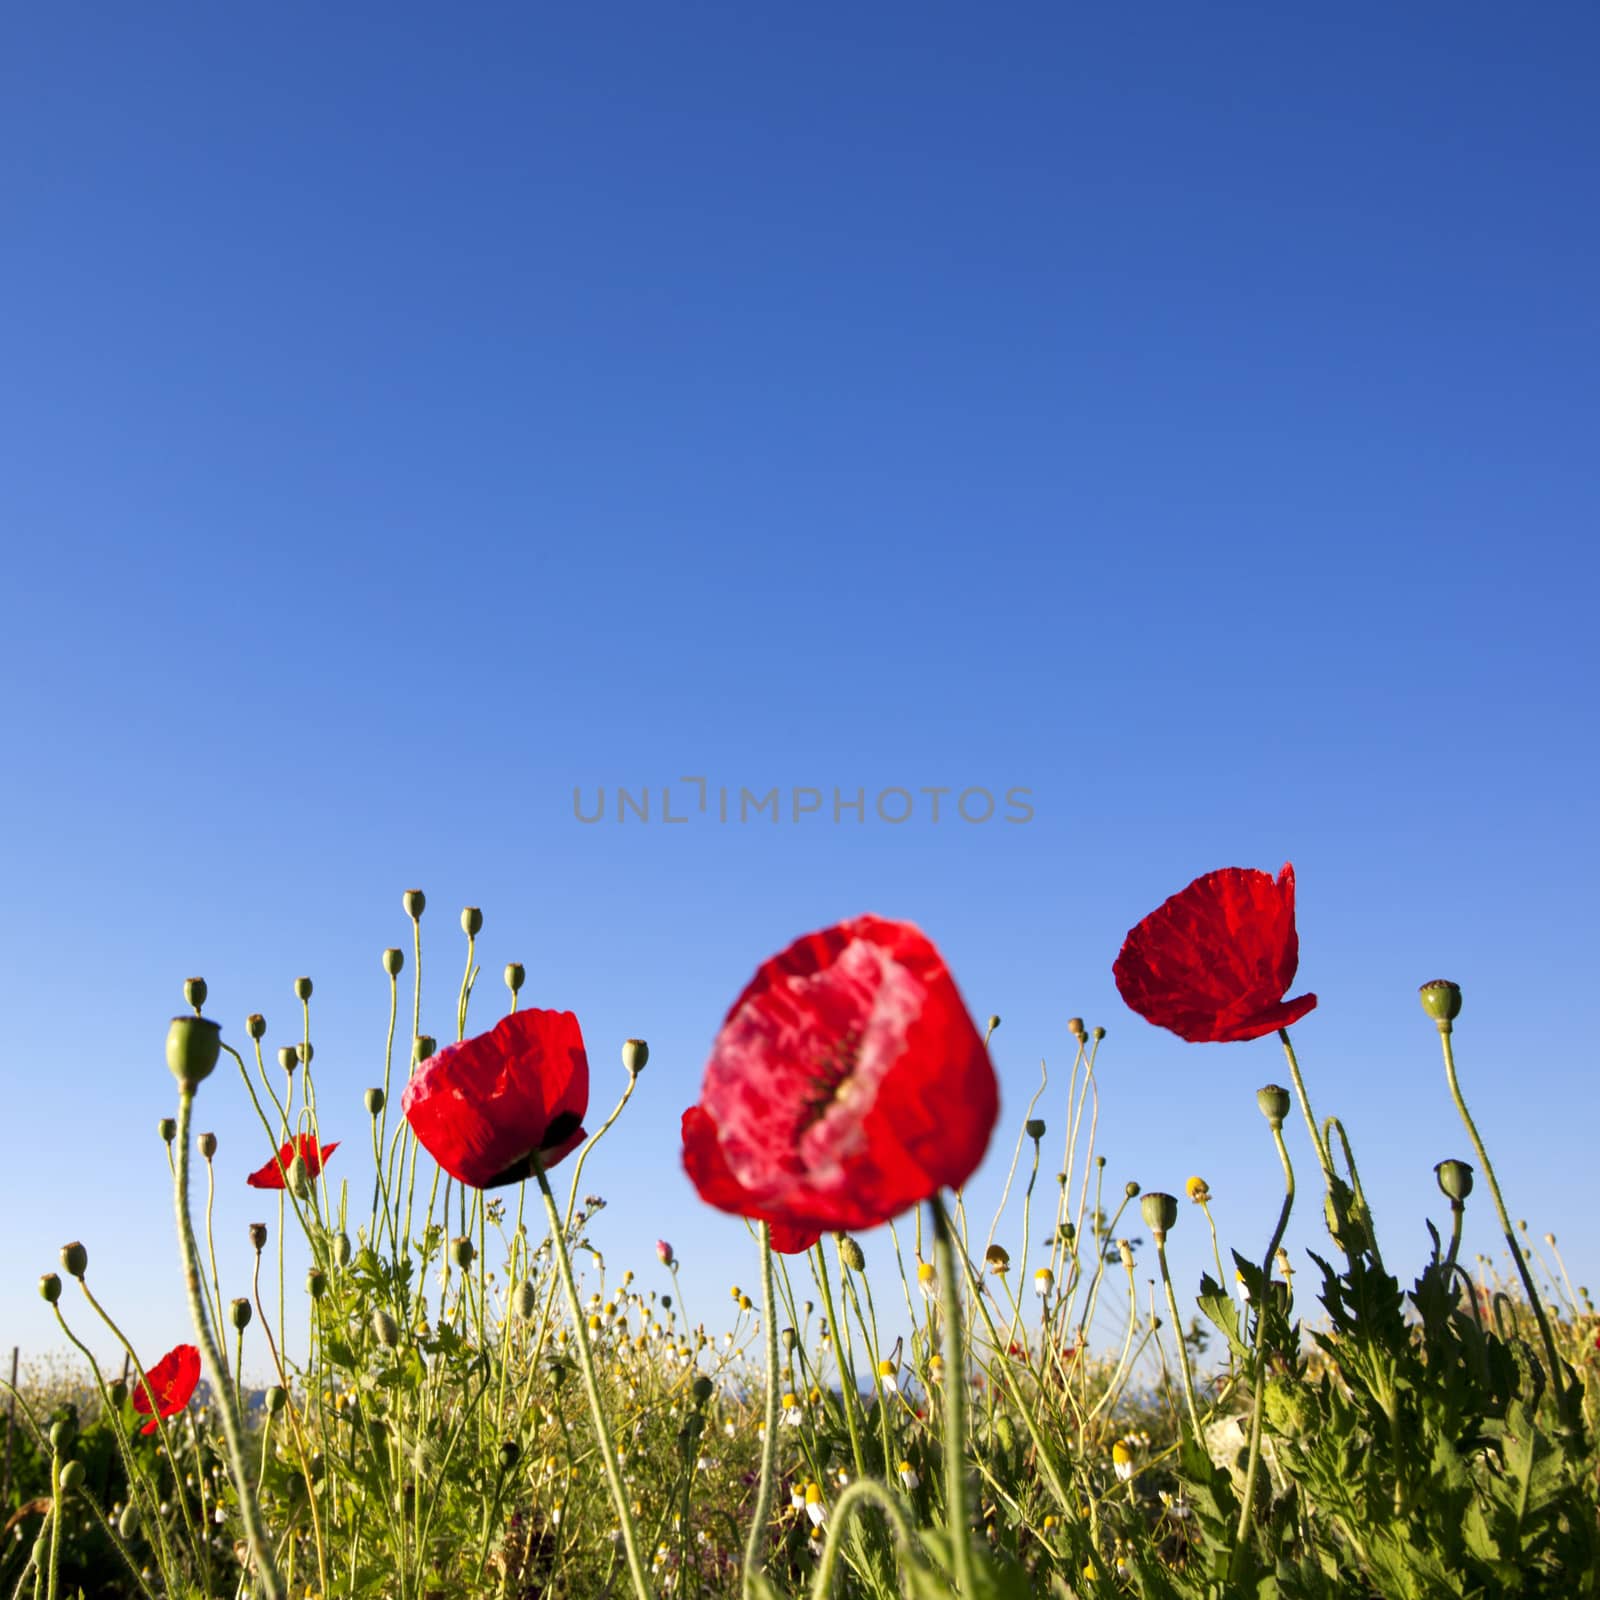 Red Poppy flowers with blue sky background by tanatat